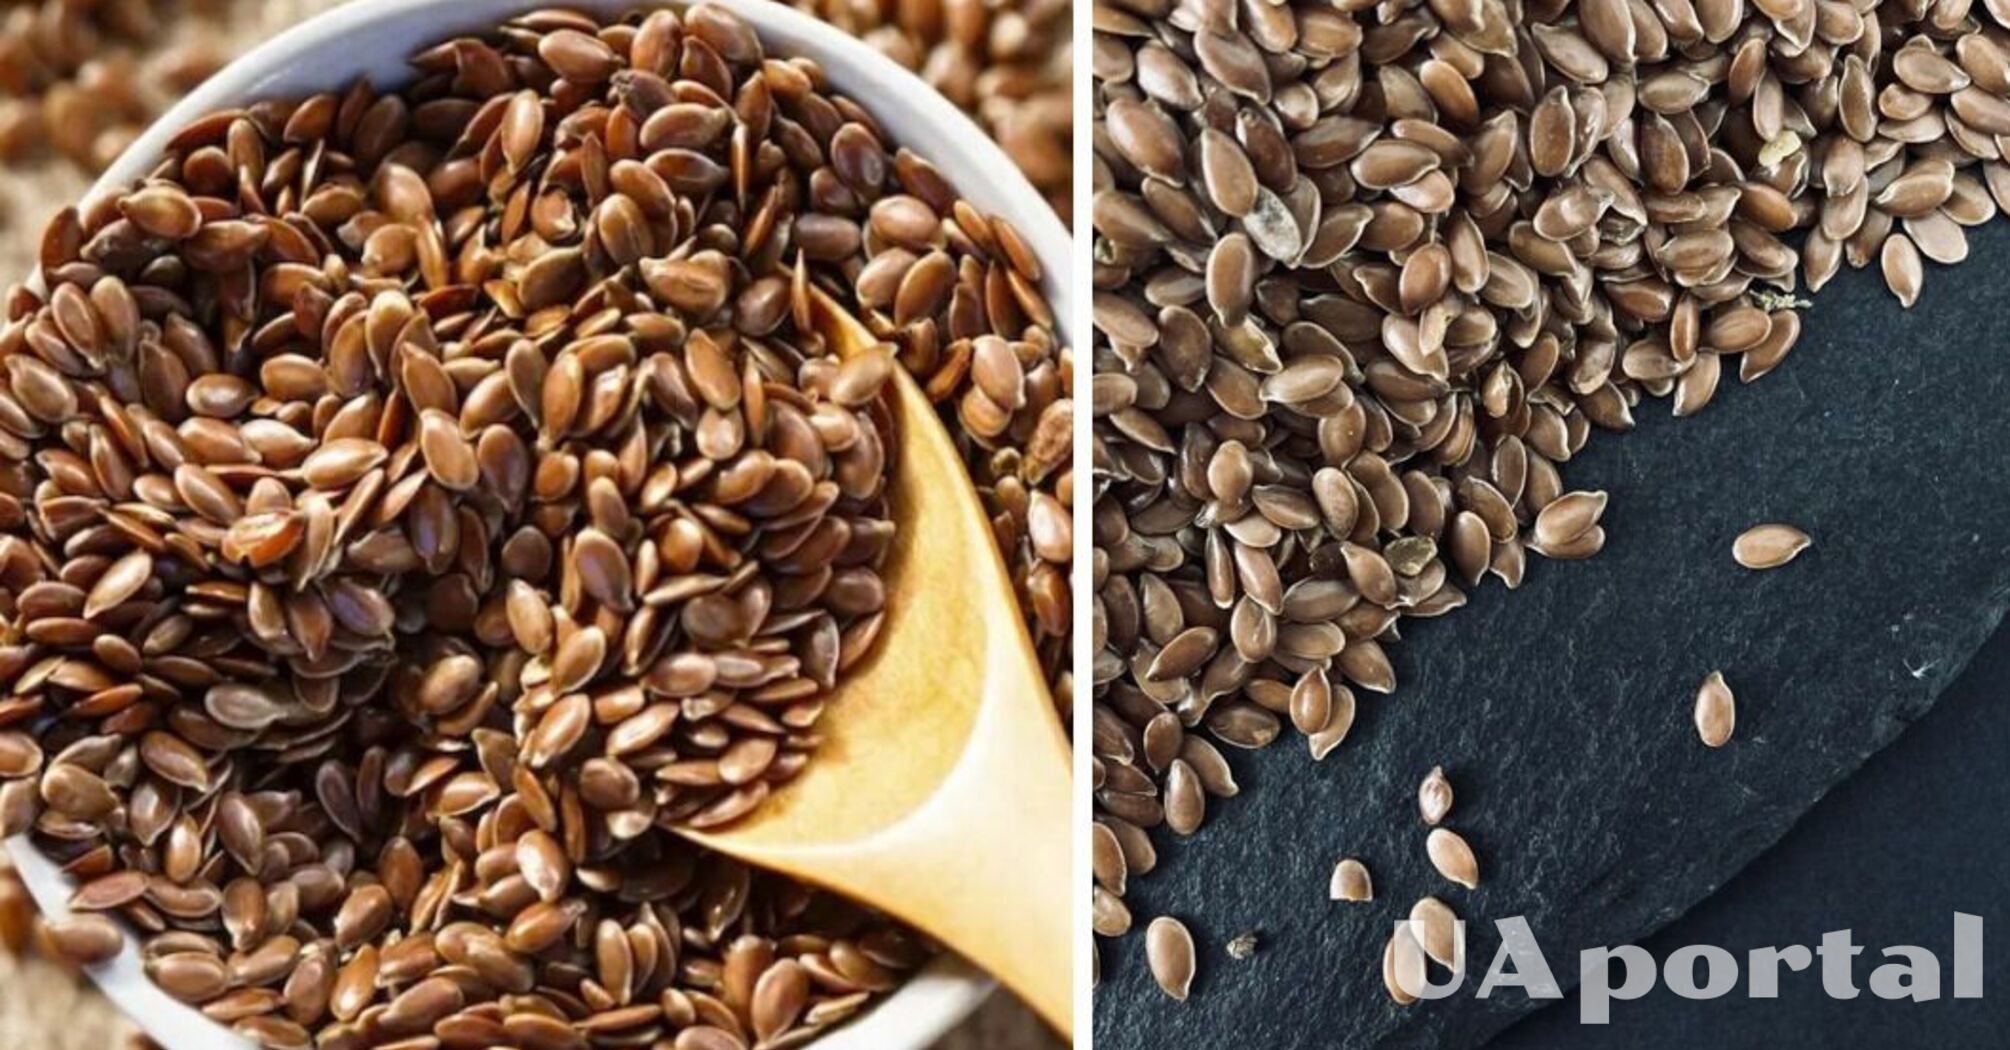 Superfood: nutritionists name the benefits of flaxseeds